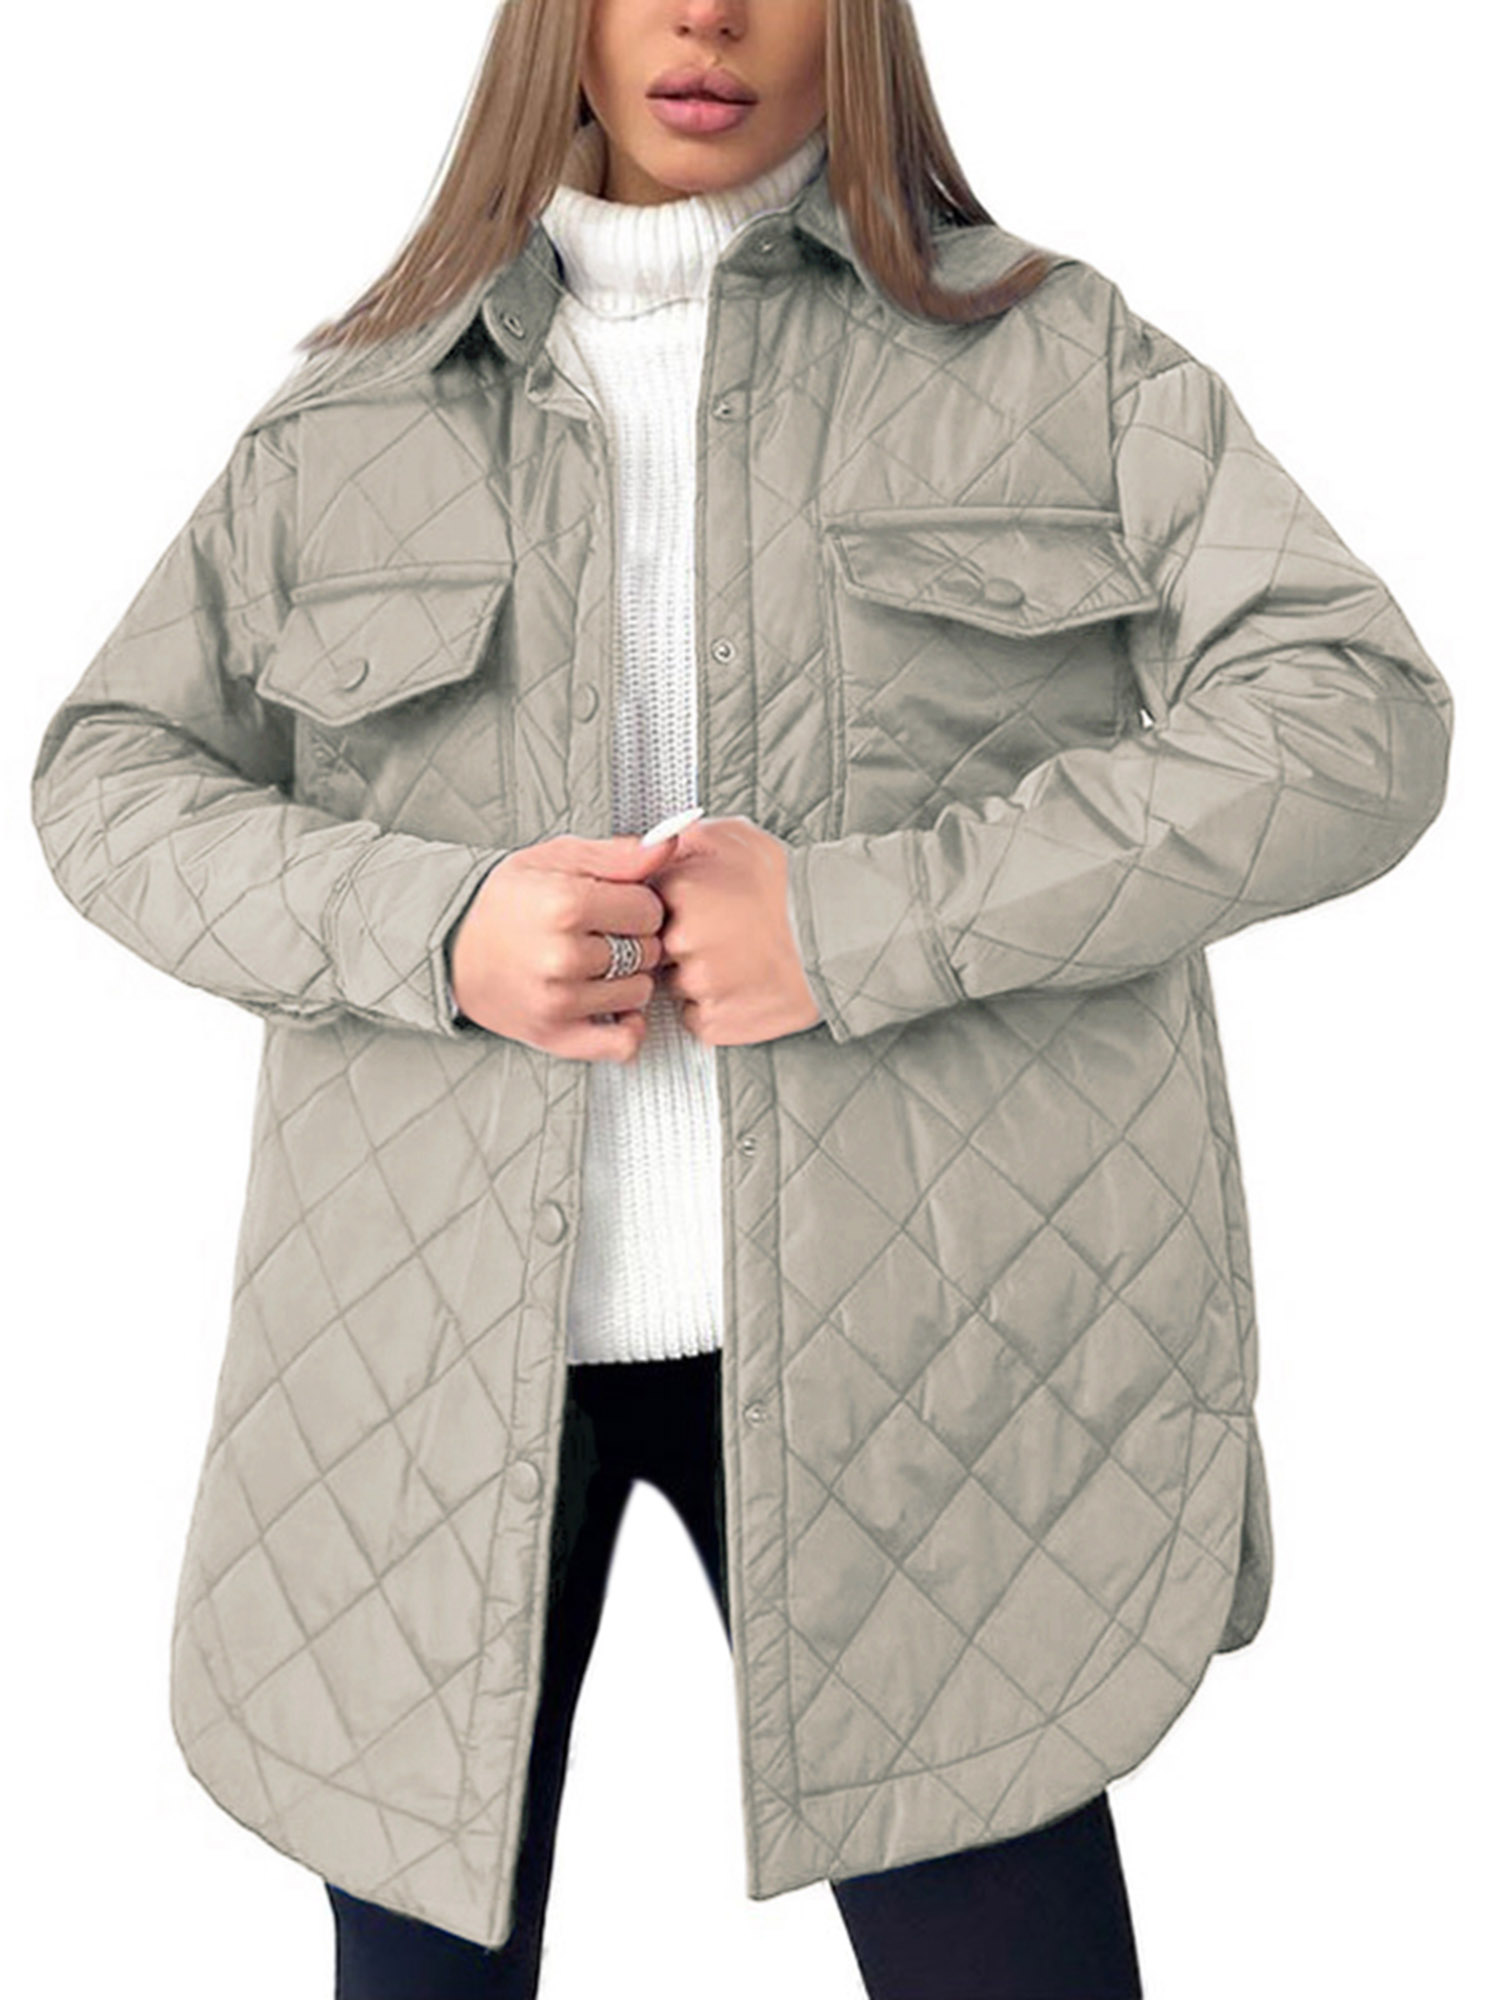 Licupiee Women Quilted Jacket with Belt Lightweight Casual Warm Solid Single Breasted Long Sleeve Outwears Overcoat Streetwear - image 1 of 3